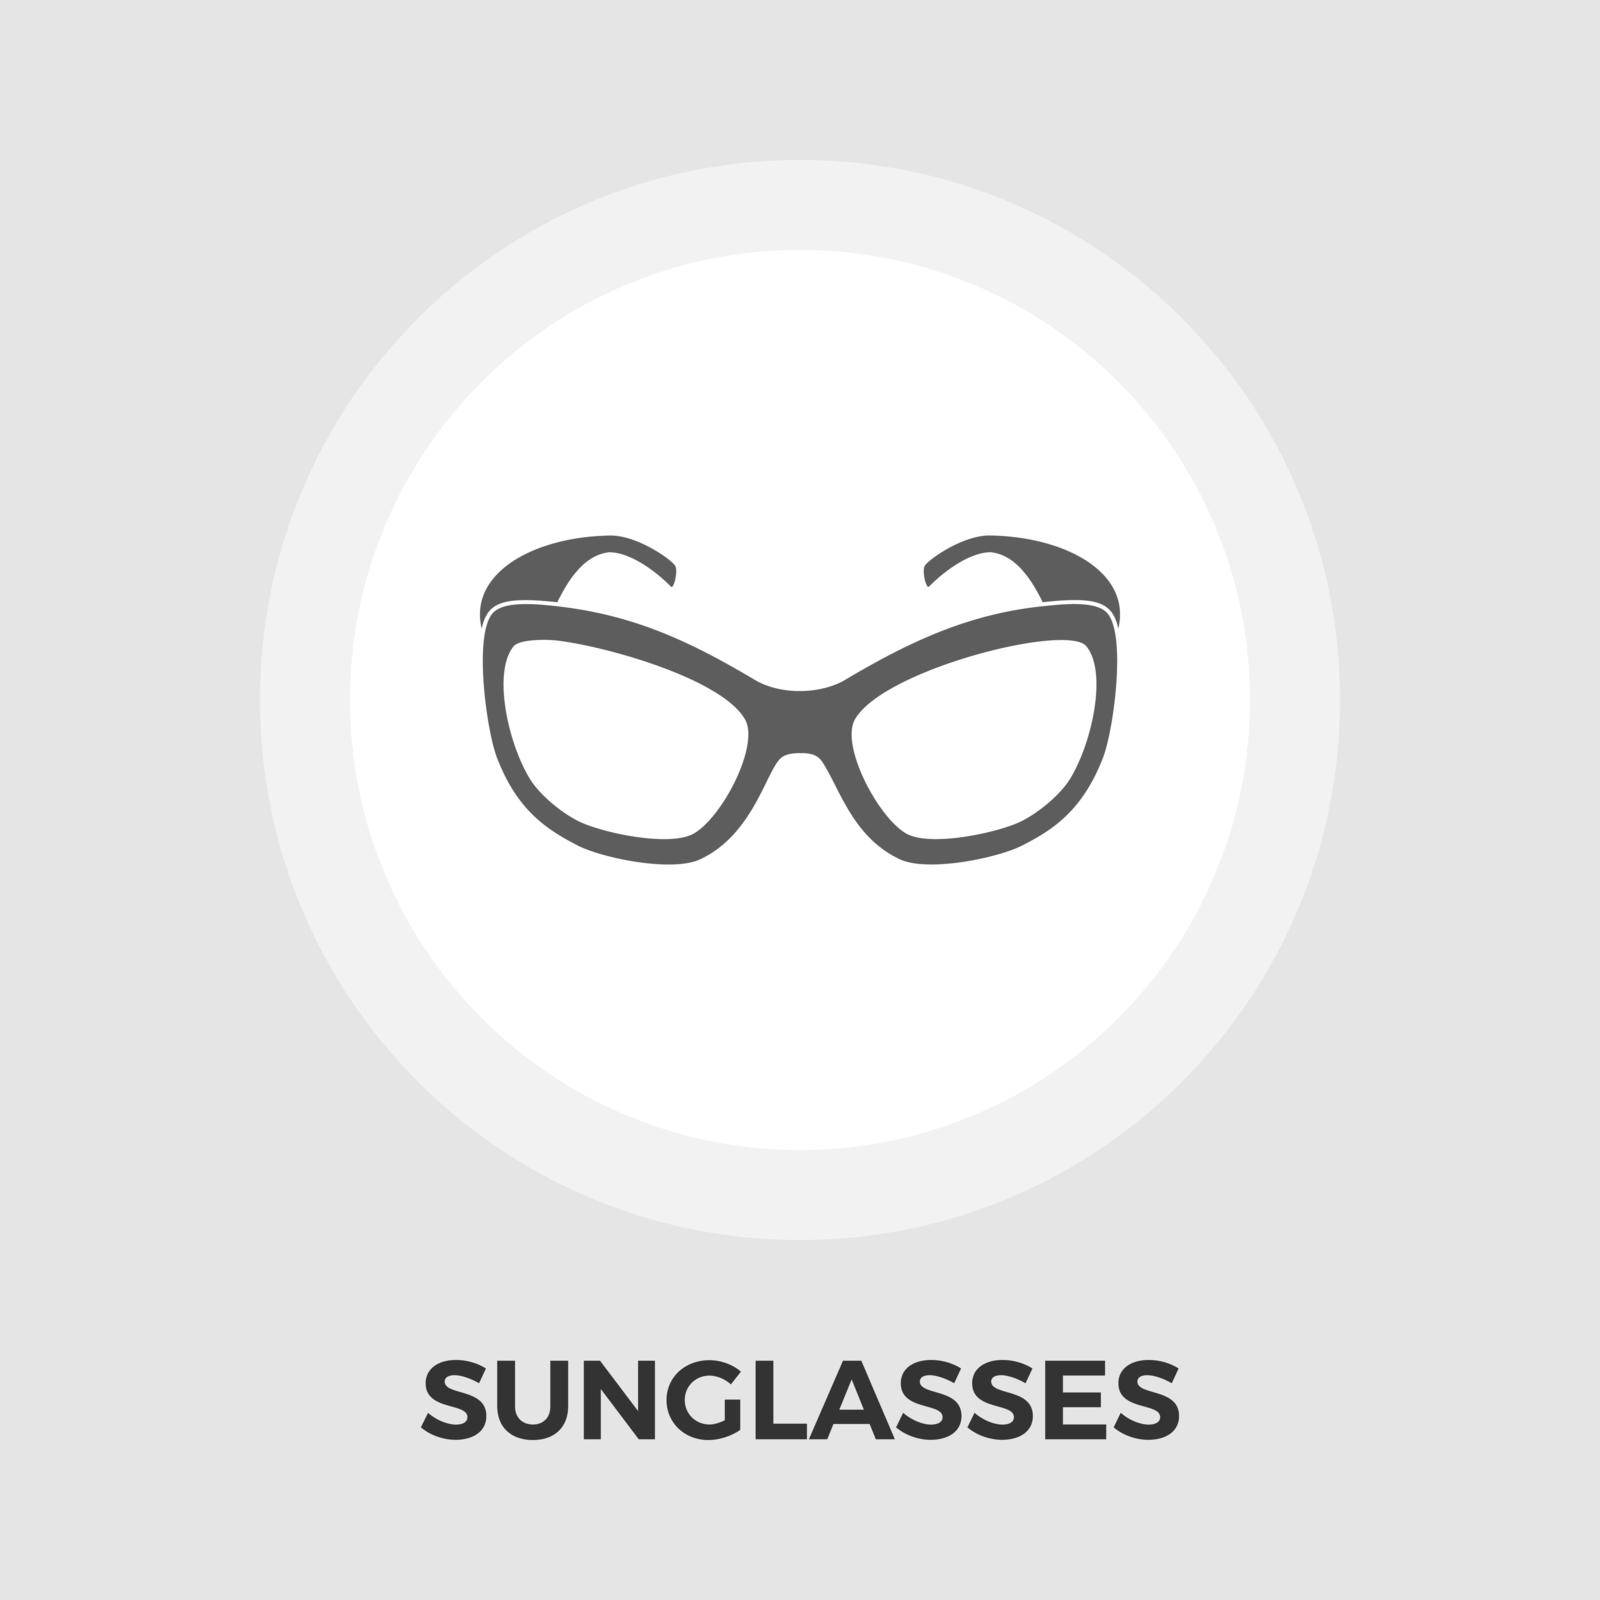 Sunglasses icon vector. Flat icon isolated on the white background. Editable EPS file. Vector illustration.